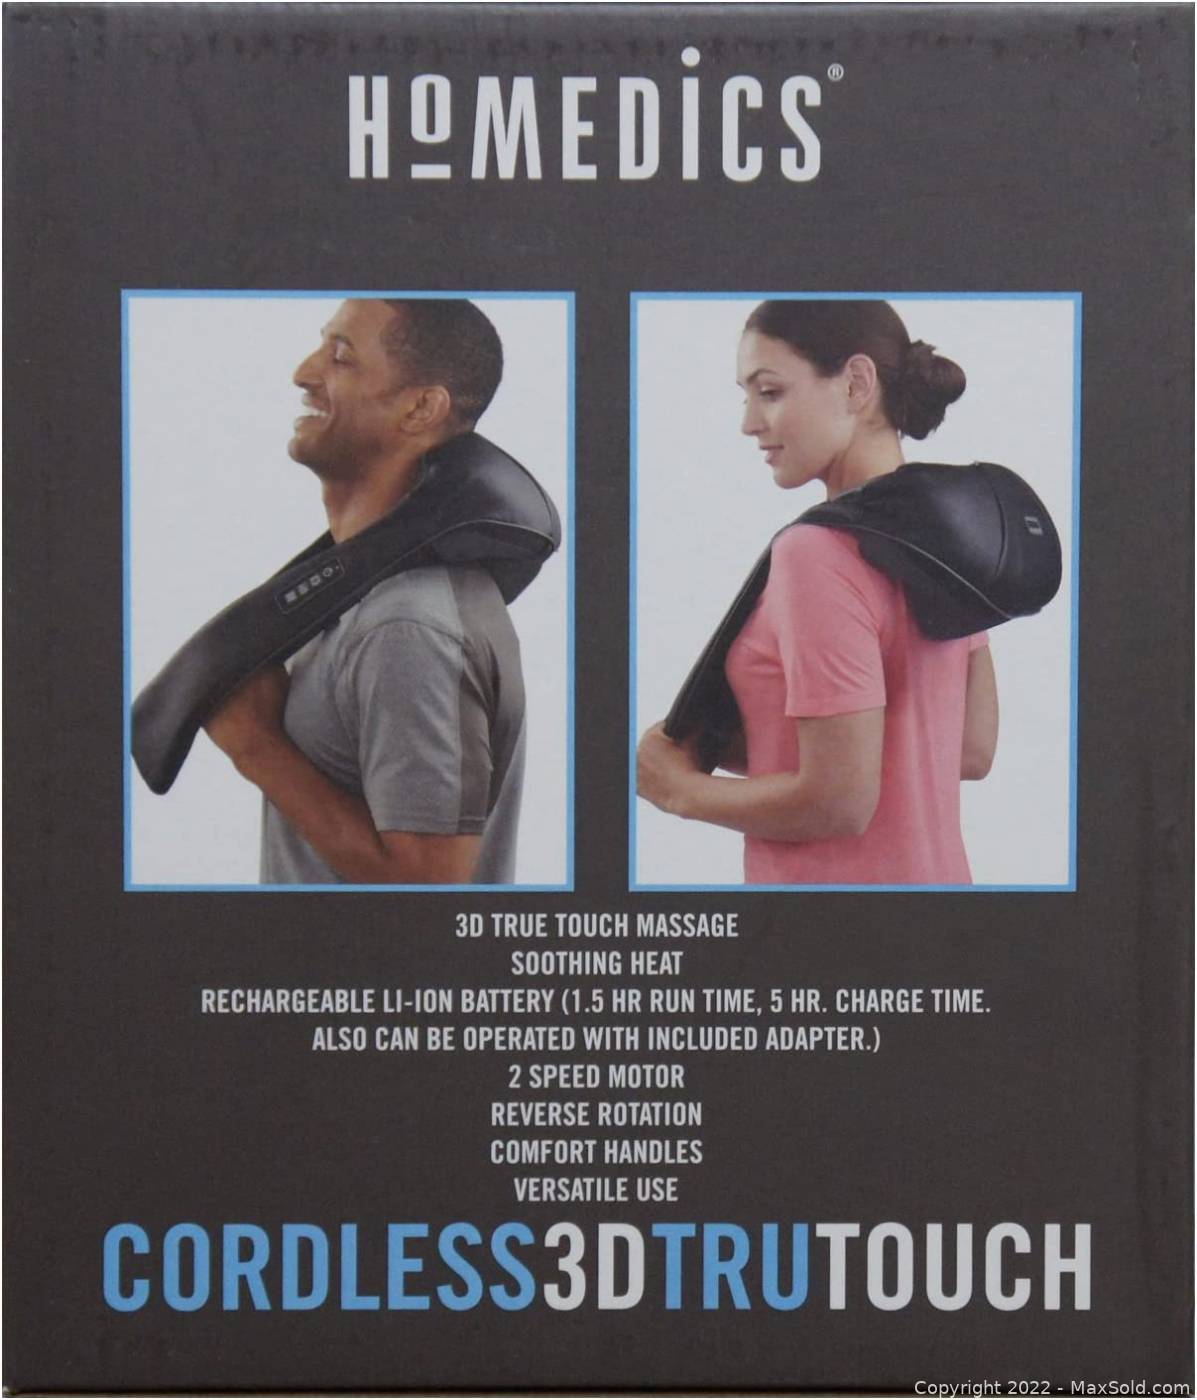 Brand New Homedics Cordless 3D Trutouch Neck and Shoulder Massager